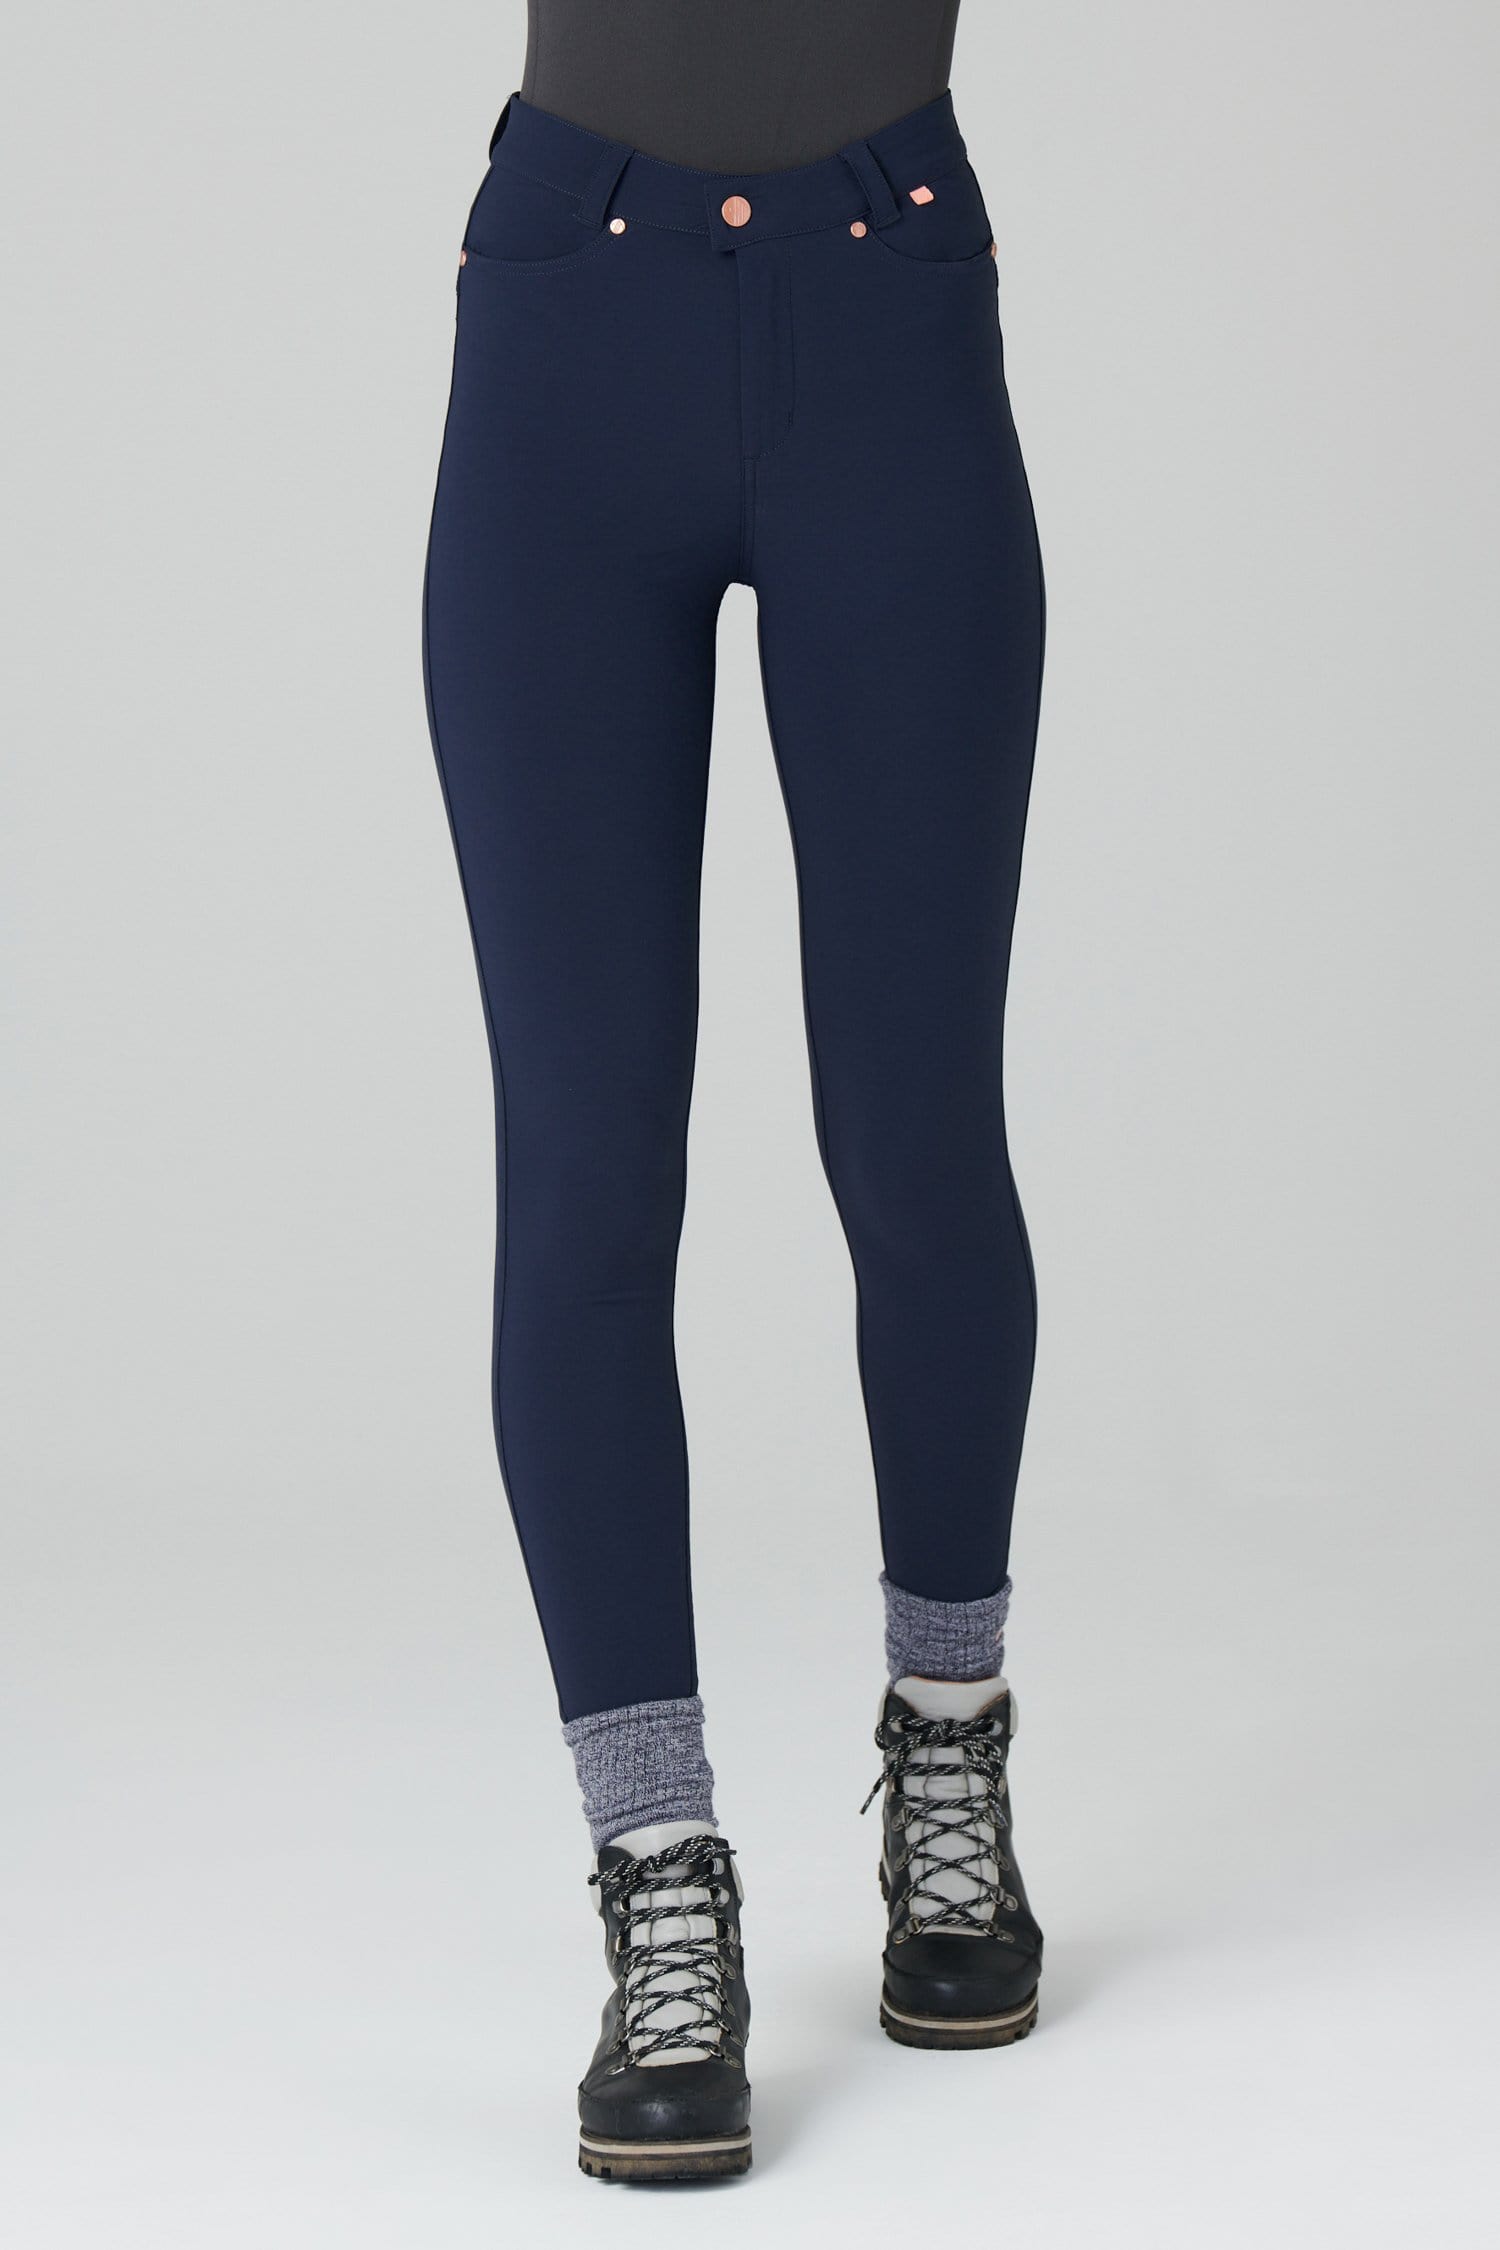 Max Stretch Skinny Outdoor Trousers - Deep Navy - 28p / Uk10 - Womens - Acai Outdoorwear